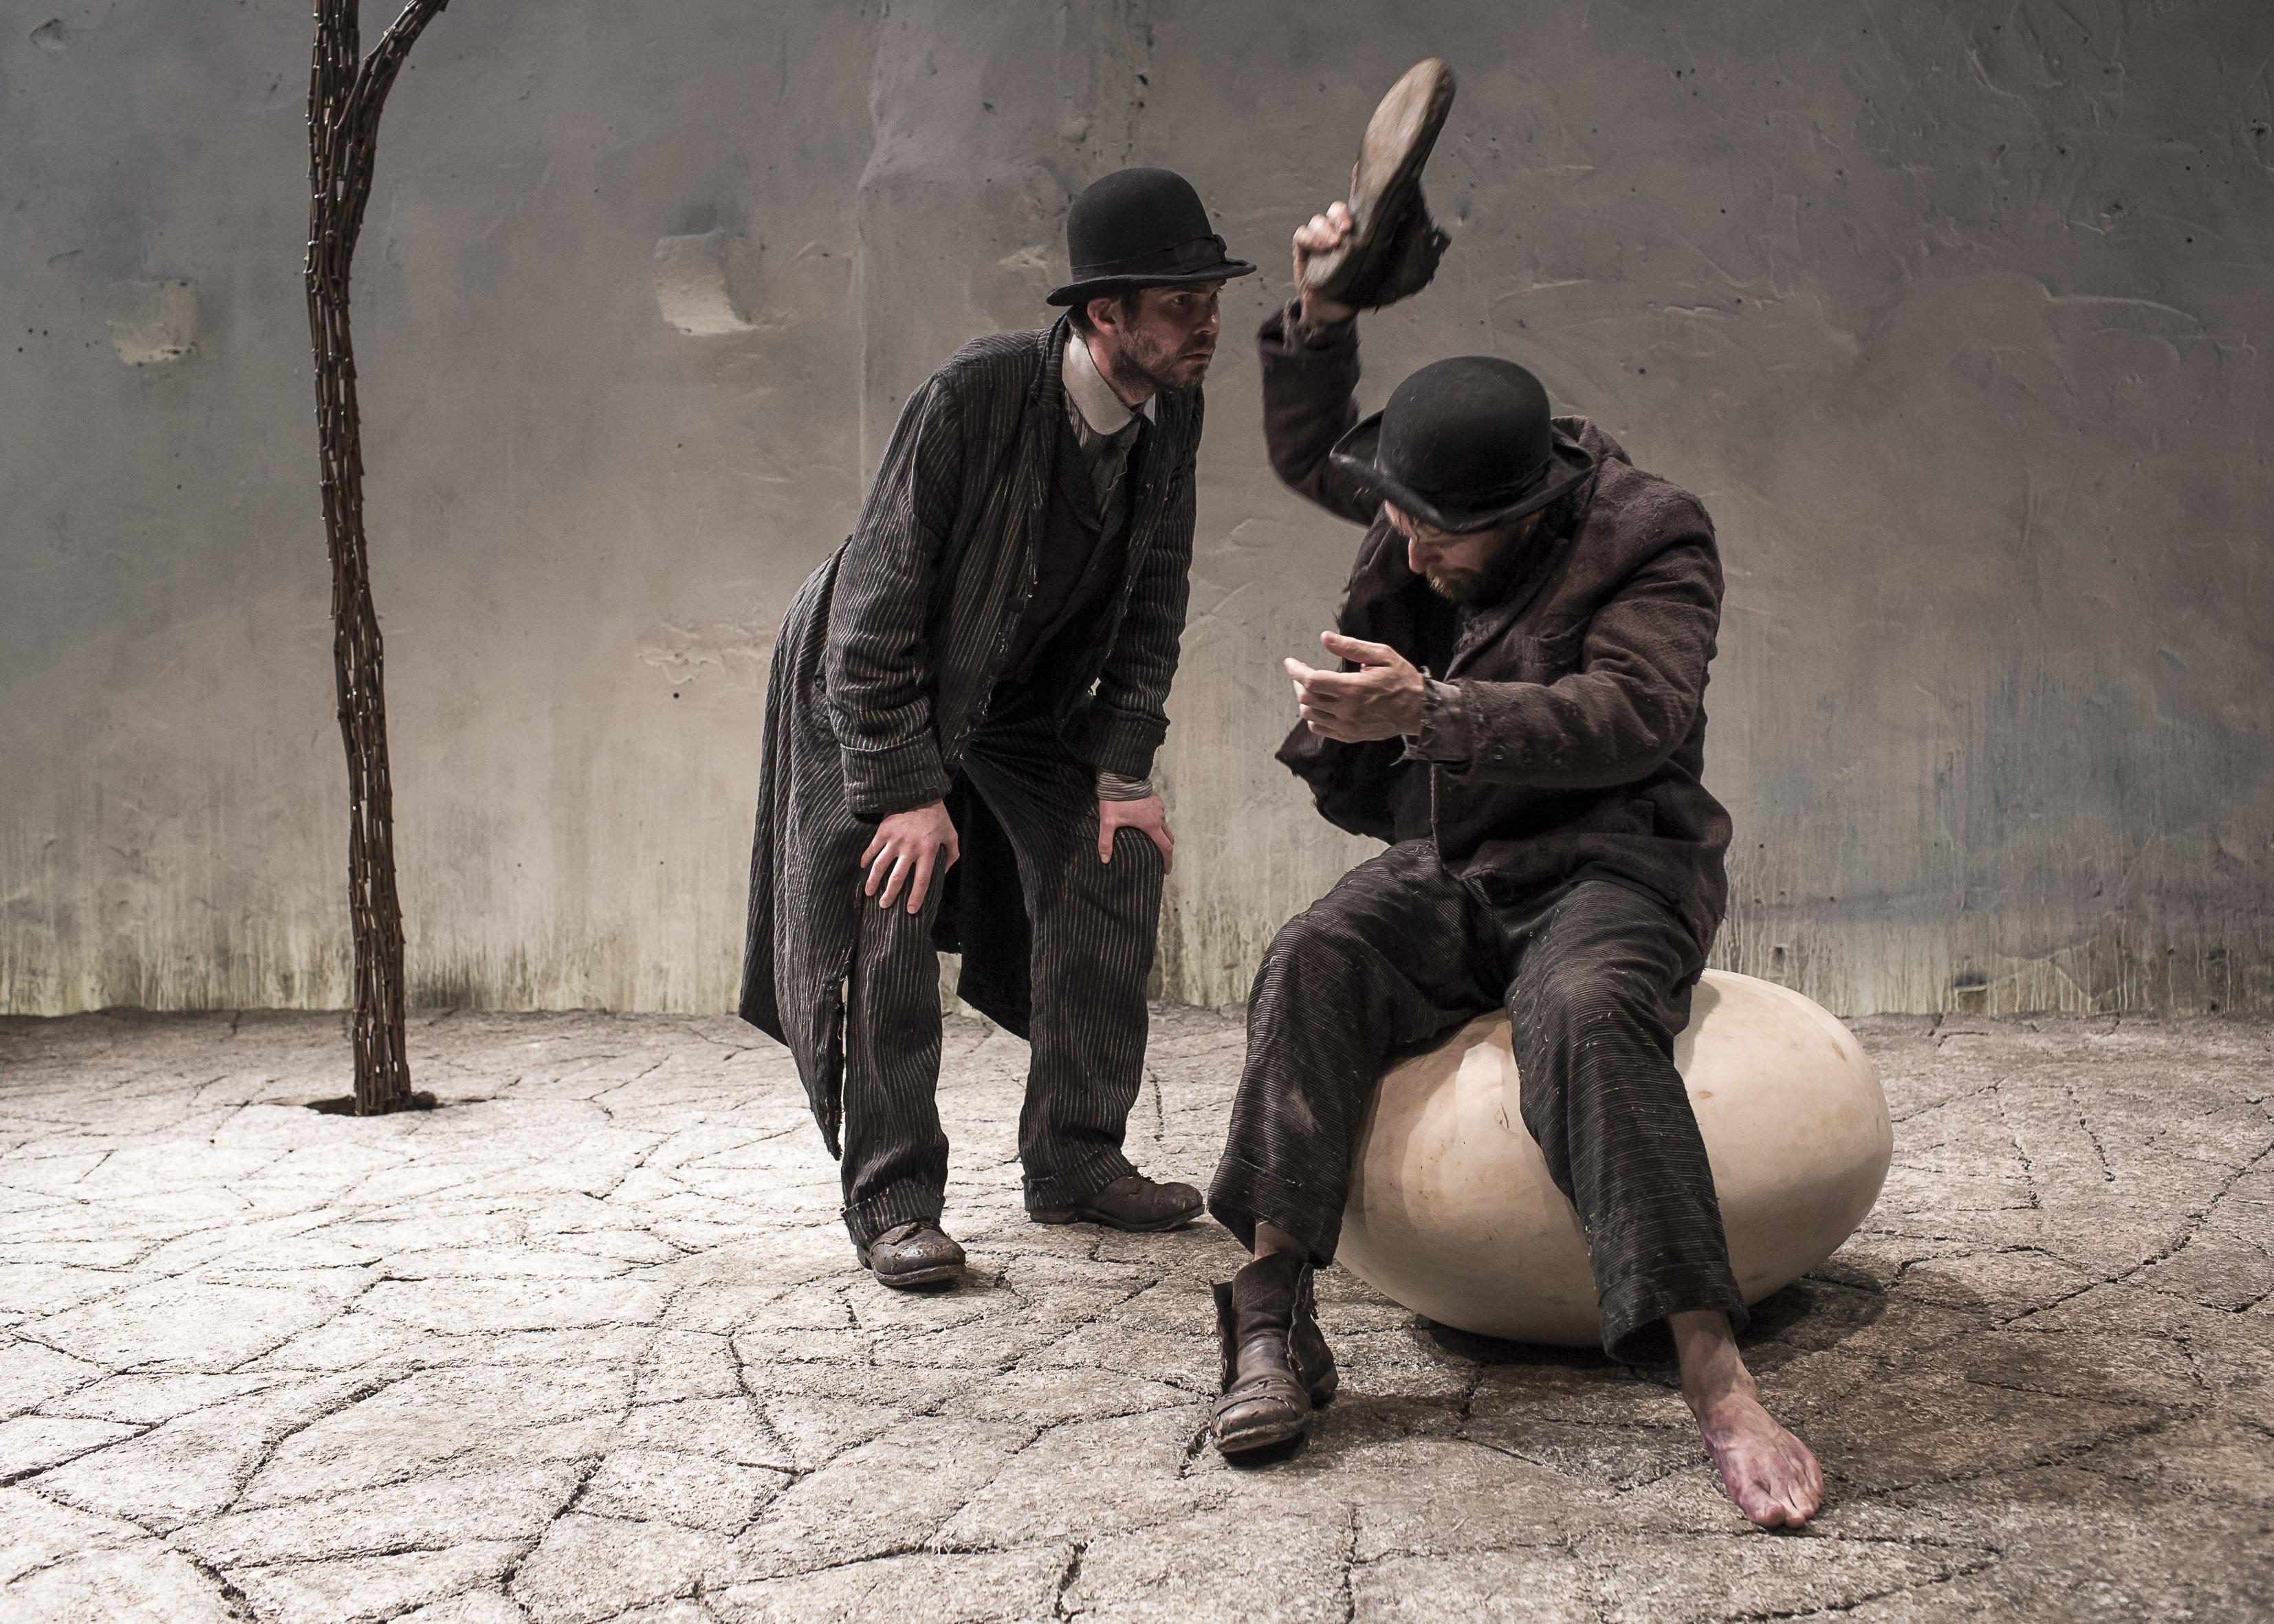 Marty Rea as Vladimir and Aaron Monaghan as Estragon in Druid theatre company’s “Waiting for Godot” at Chicago Shakespeare Theater. (Photo by Matthew Thompson)